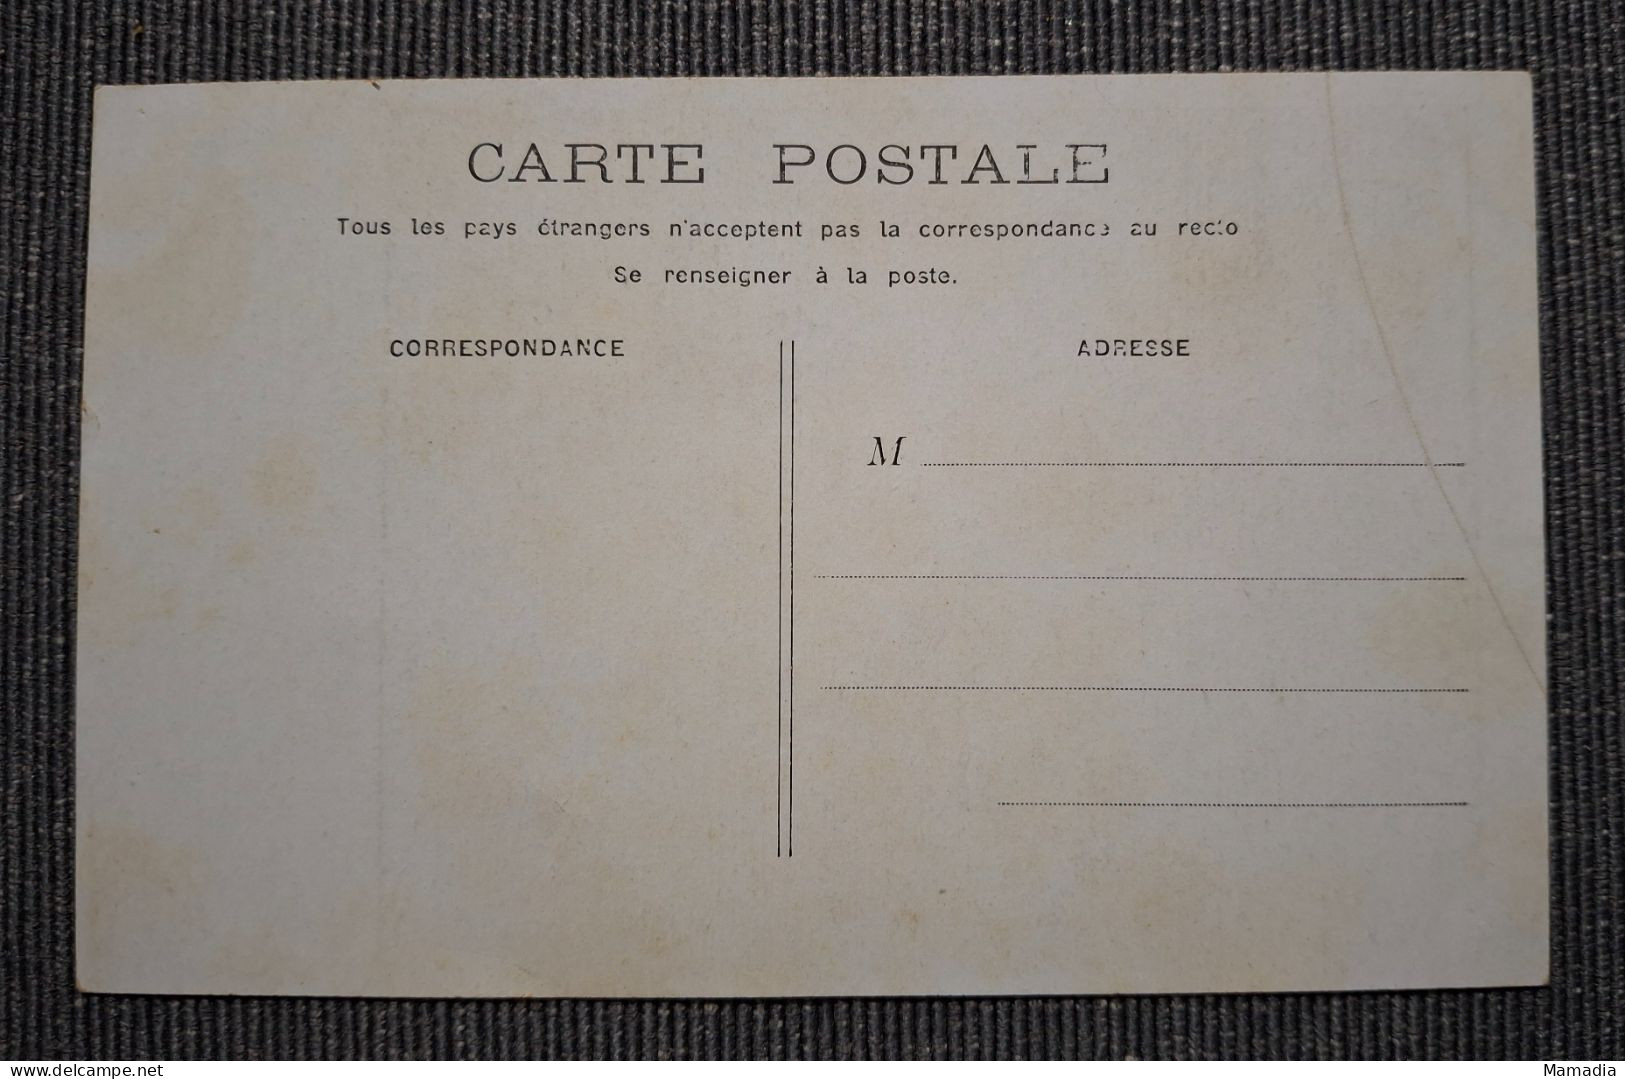 CARTE POSTALE ANCIENNE CYCLE VELO SERIE "MADEMOISELLE ECOUTEZ-MOI DONC" N°2 / 6 - Paare